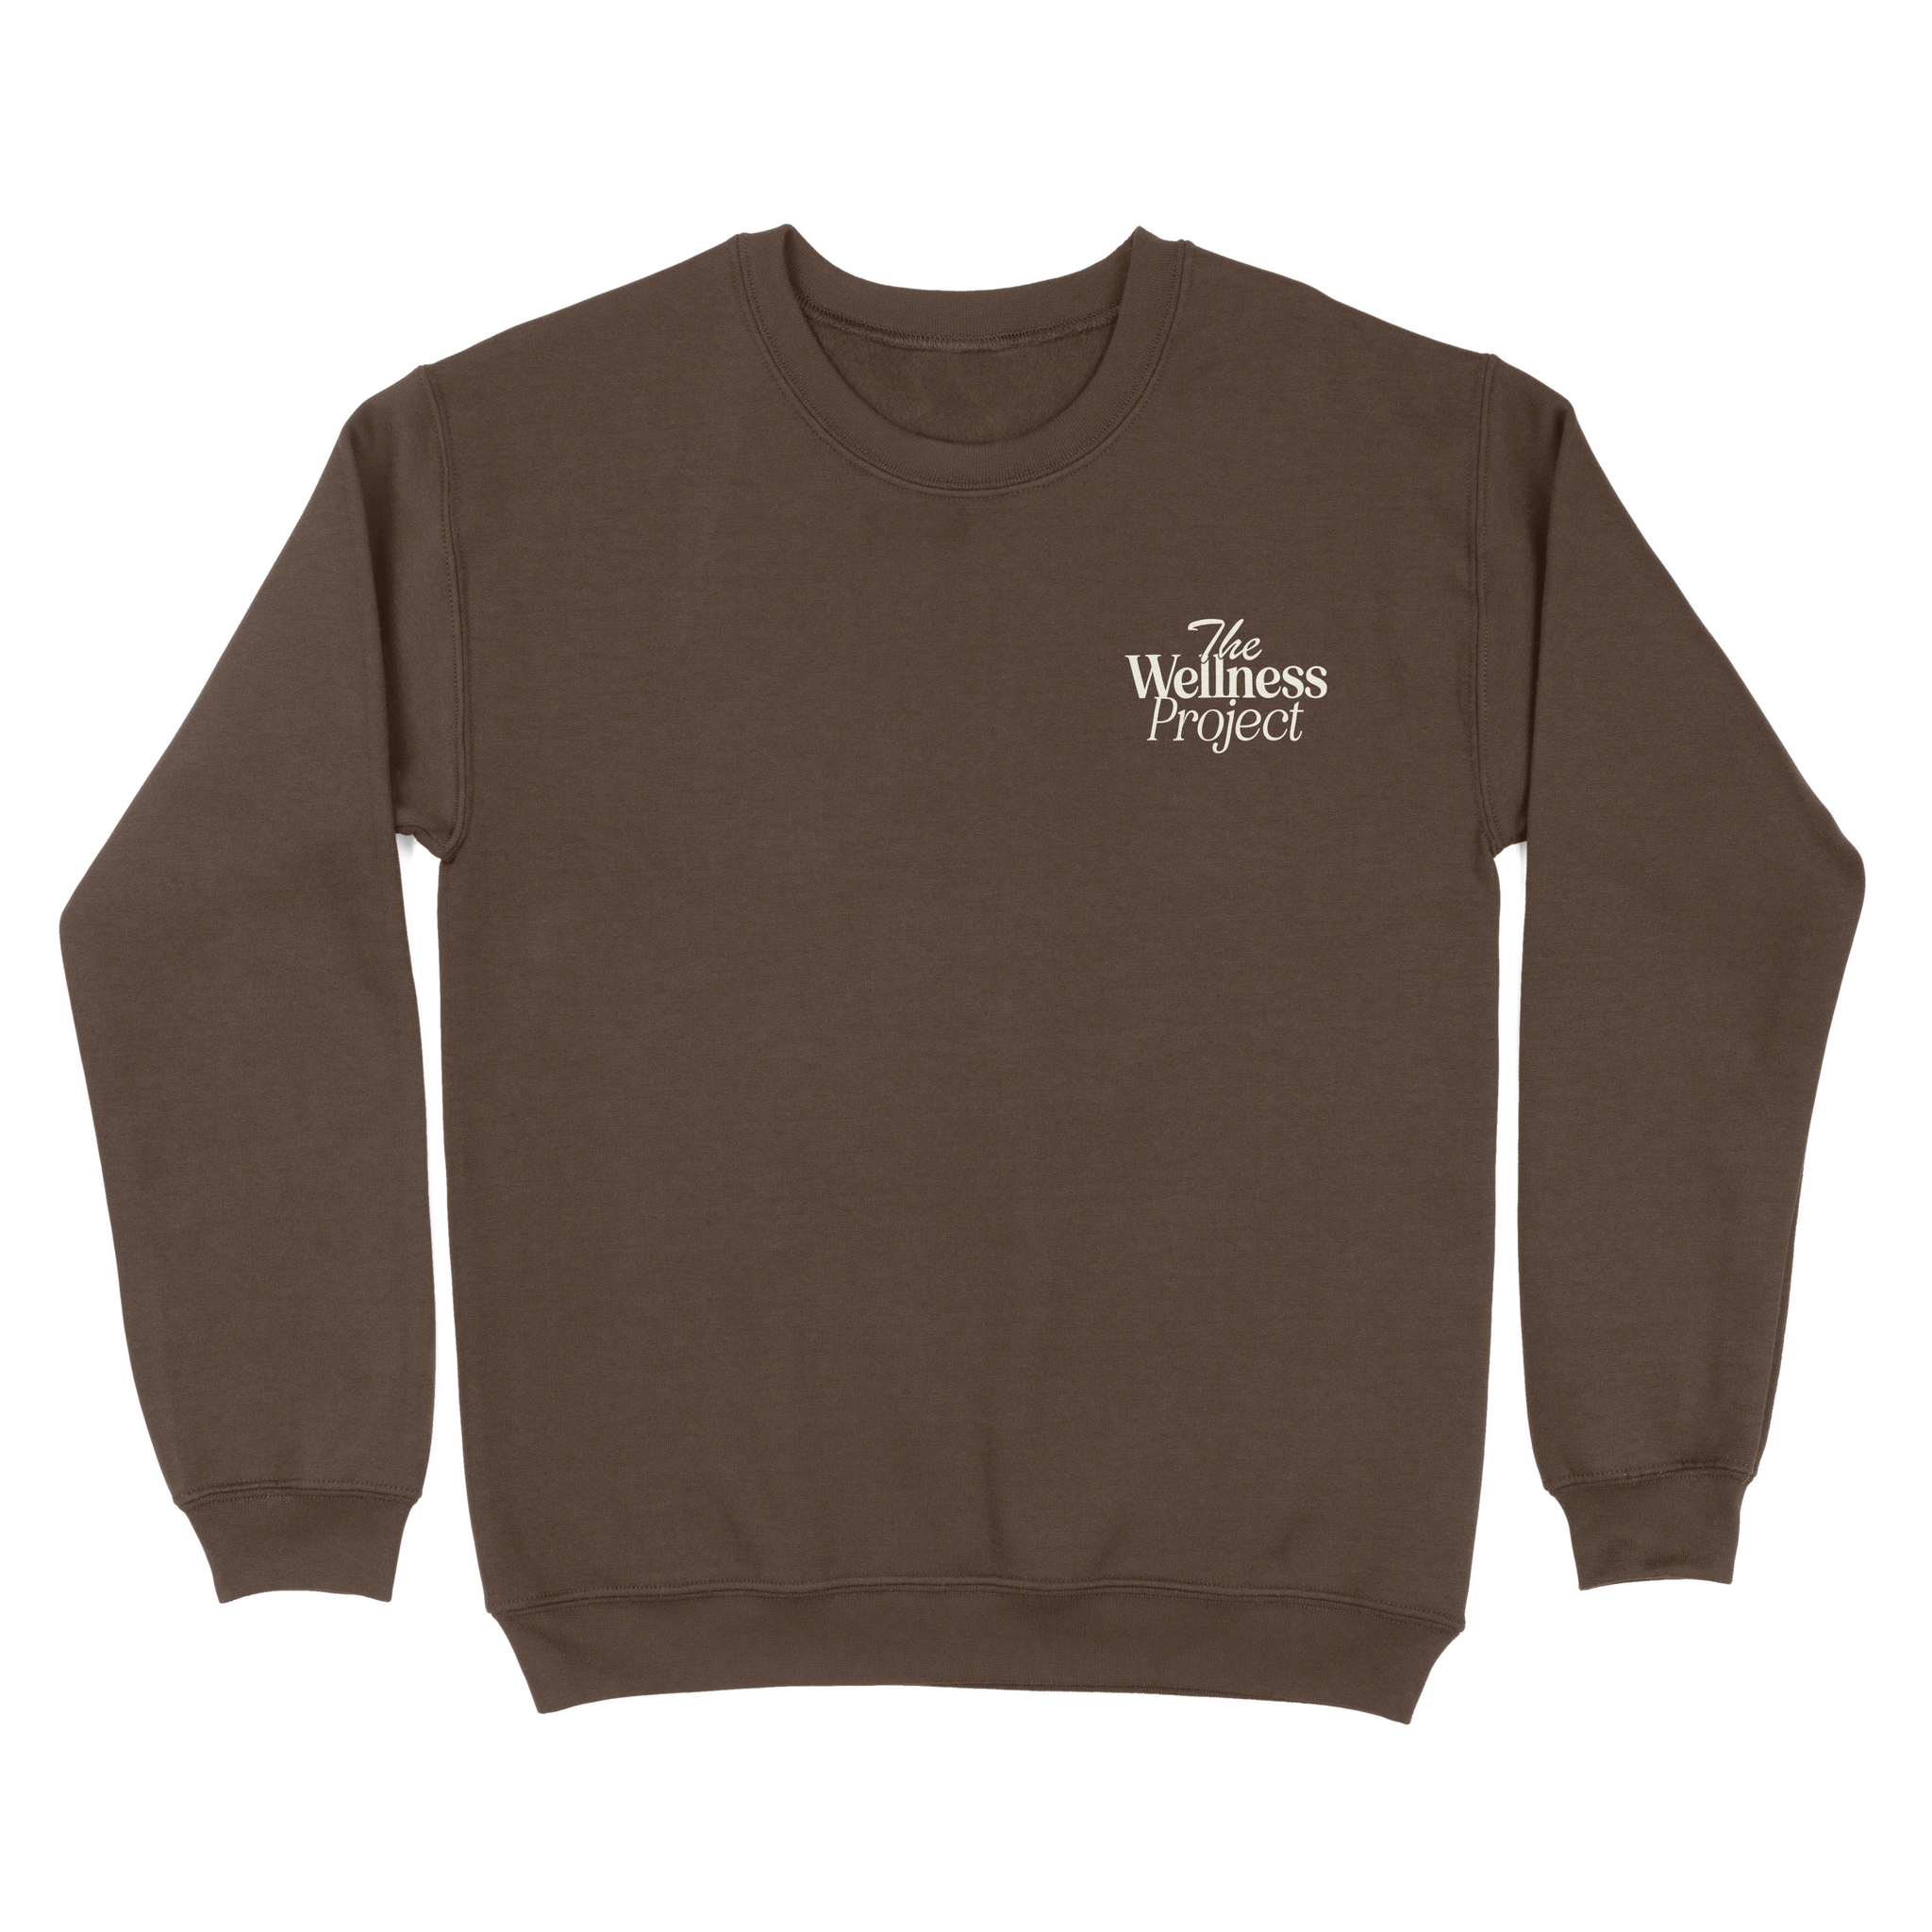 The Wellness Project Crew Neck